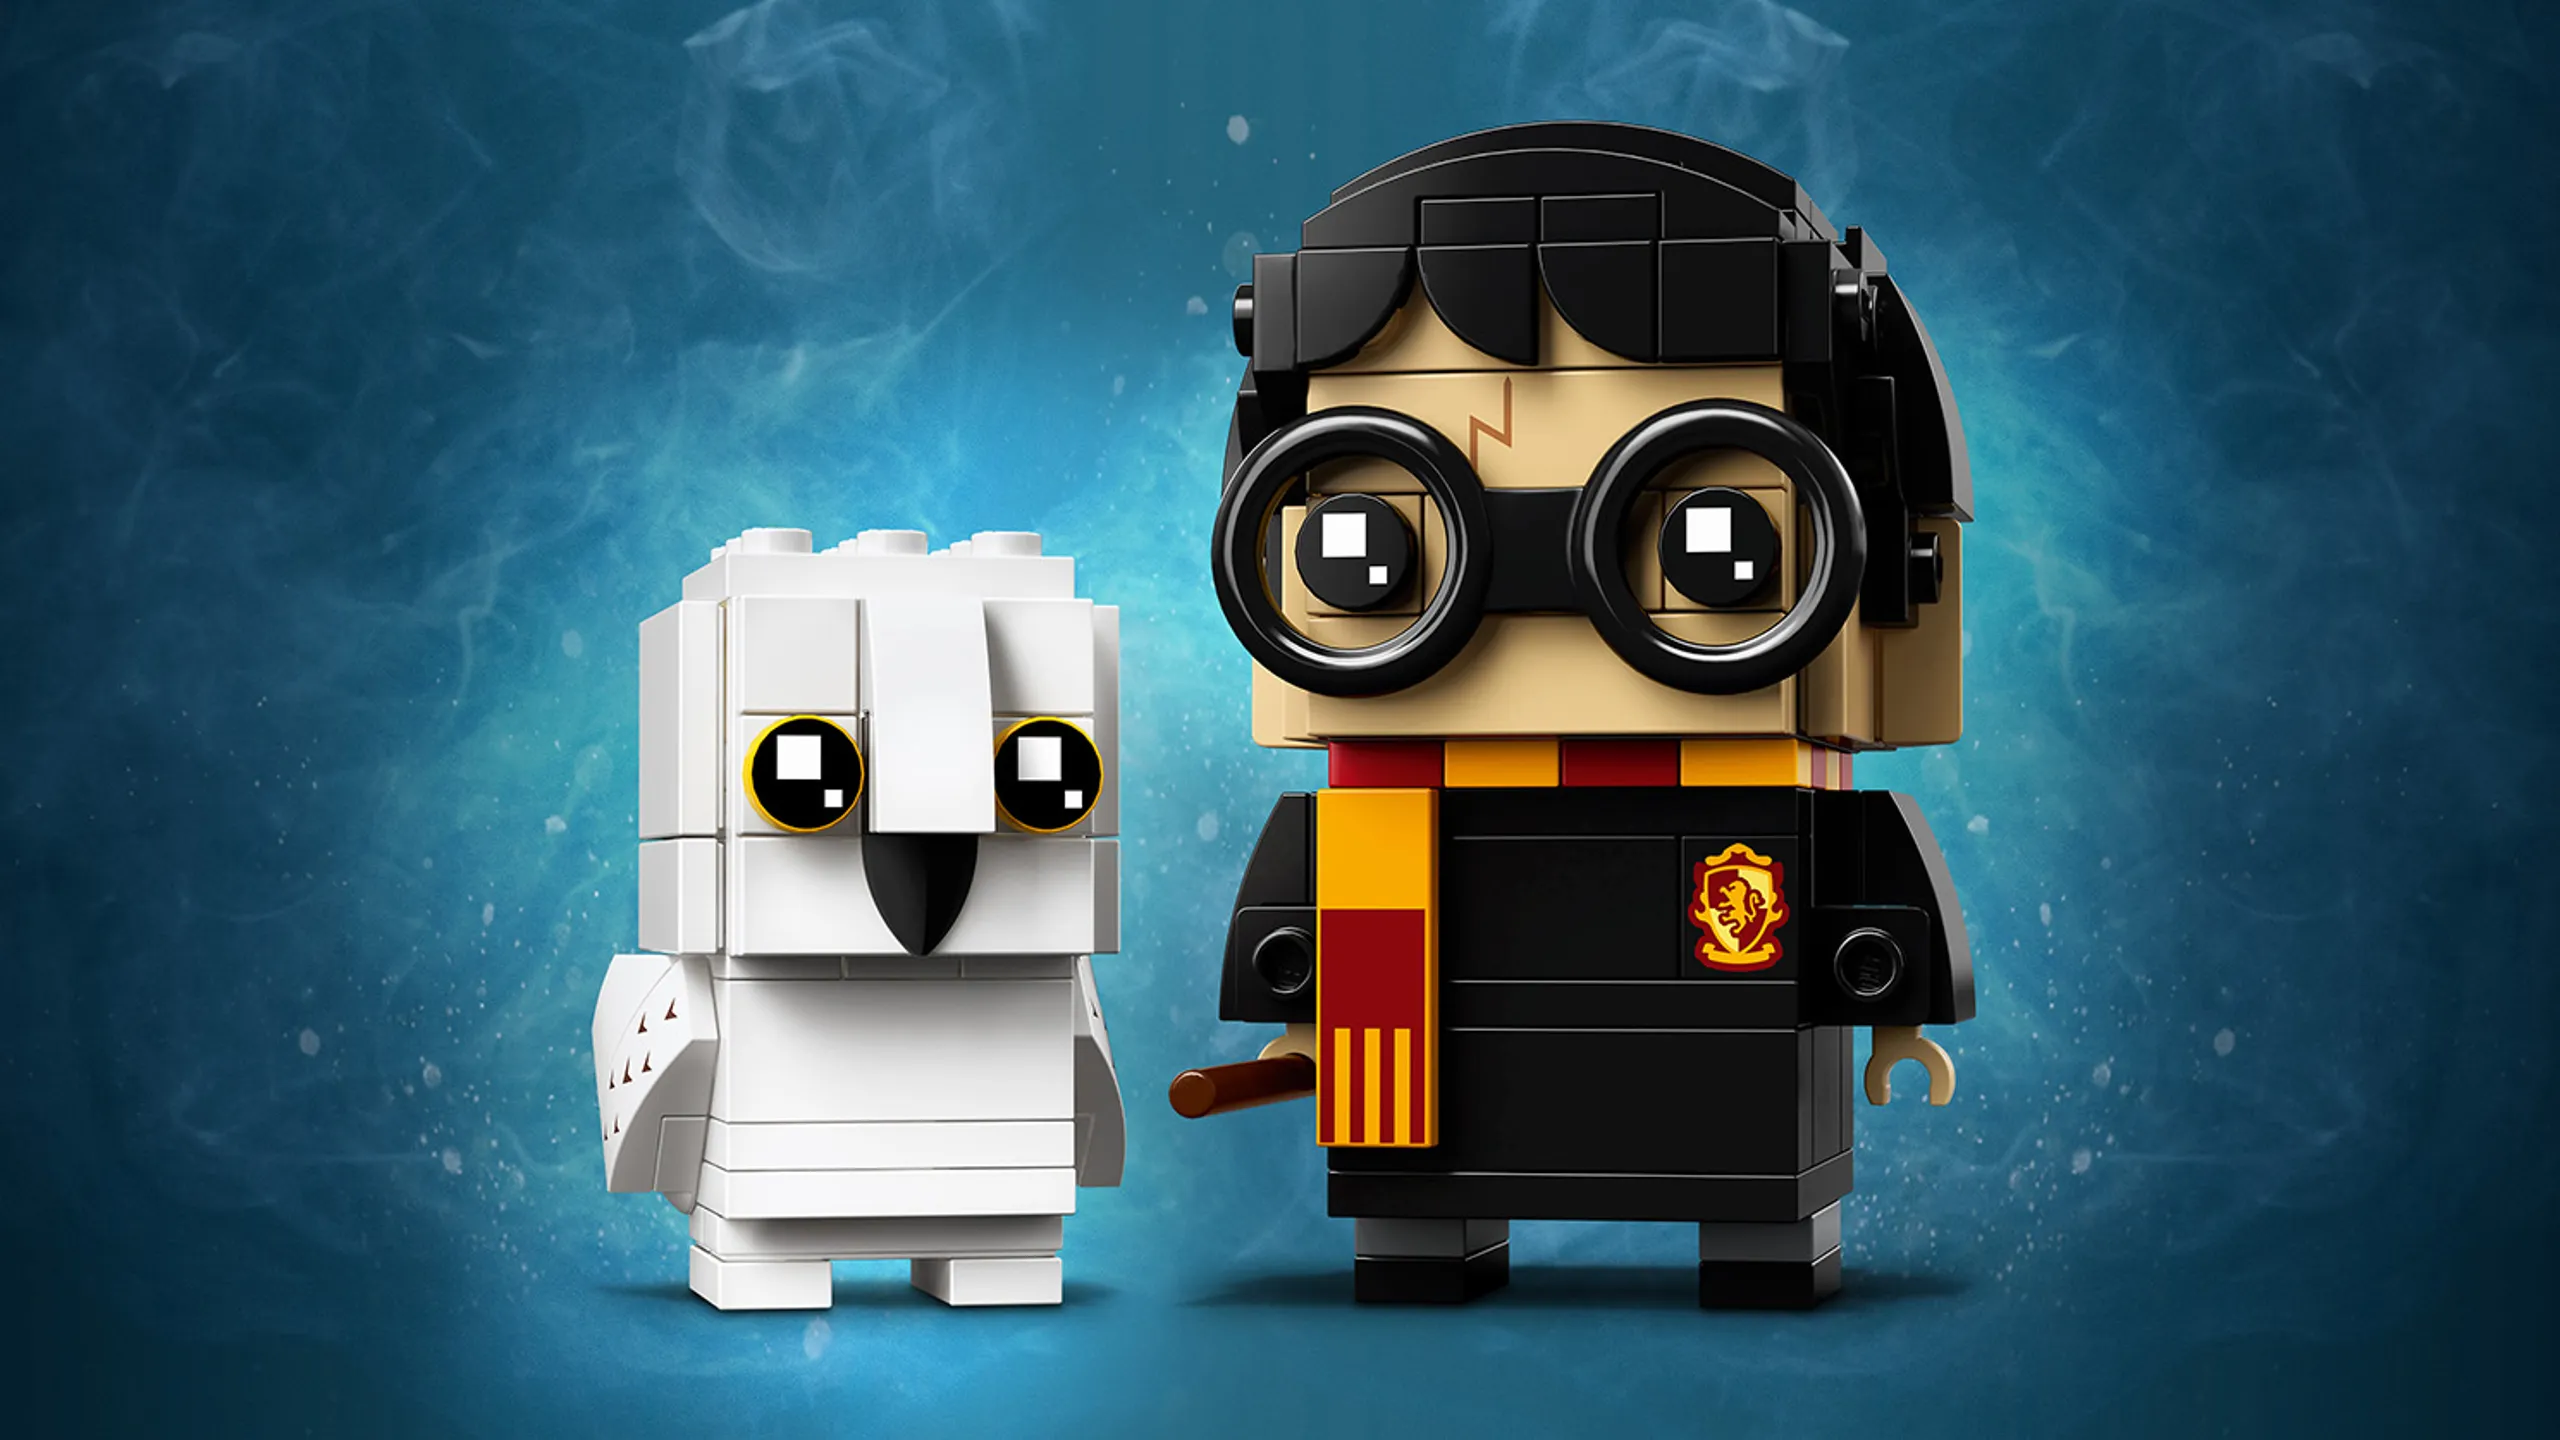 LEGO Brickheadz - 41915 Harry Potter & Hedwig - Build Harry Potter wearing Gryffindor scarf and his owl Hedwig from the movie Harry Potter and The Sorcerer's Stone.